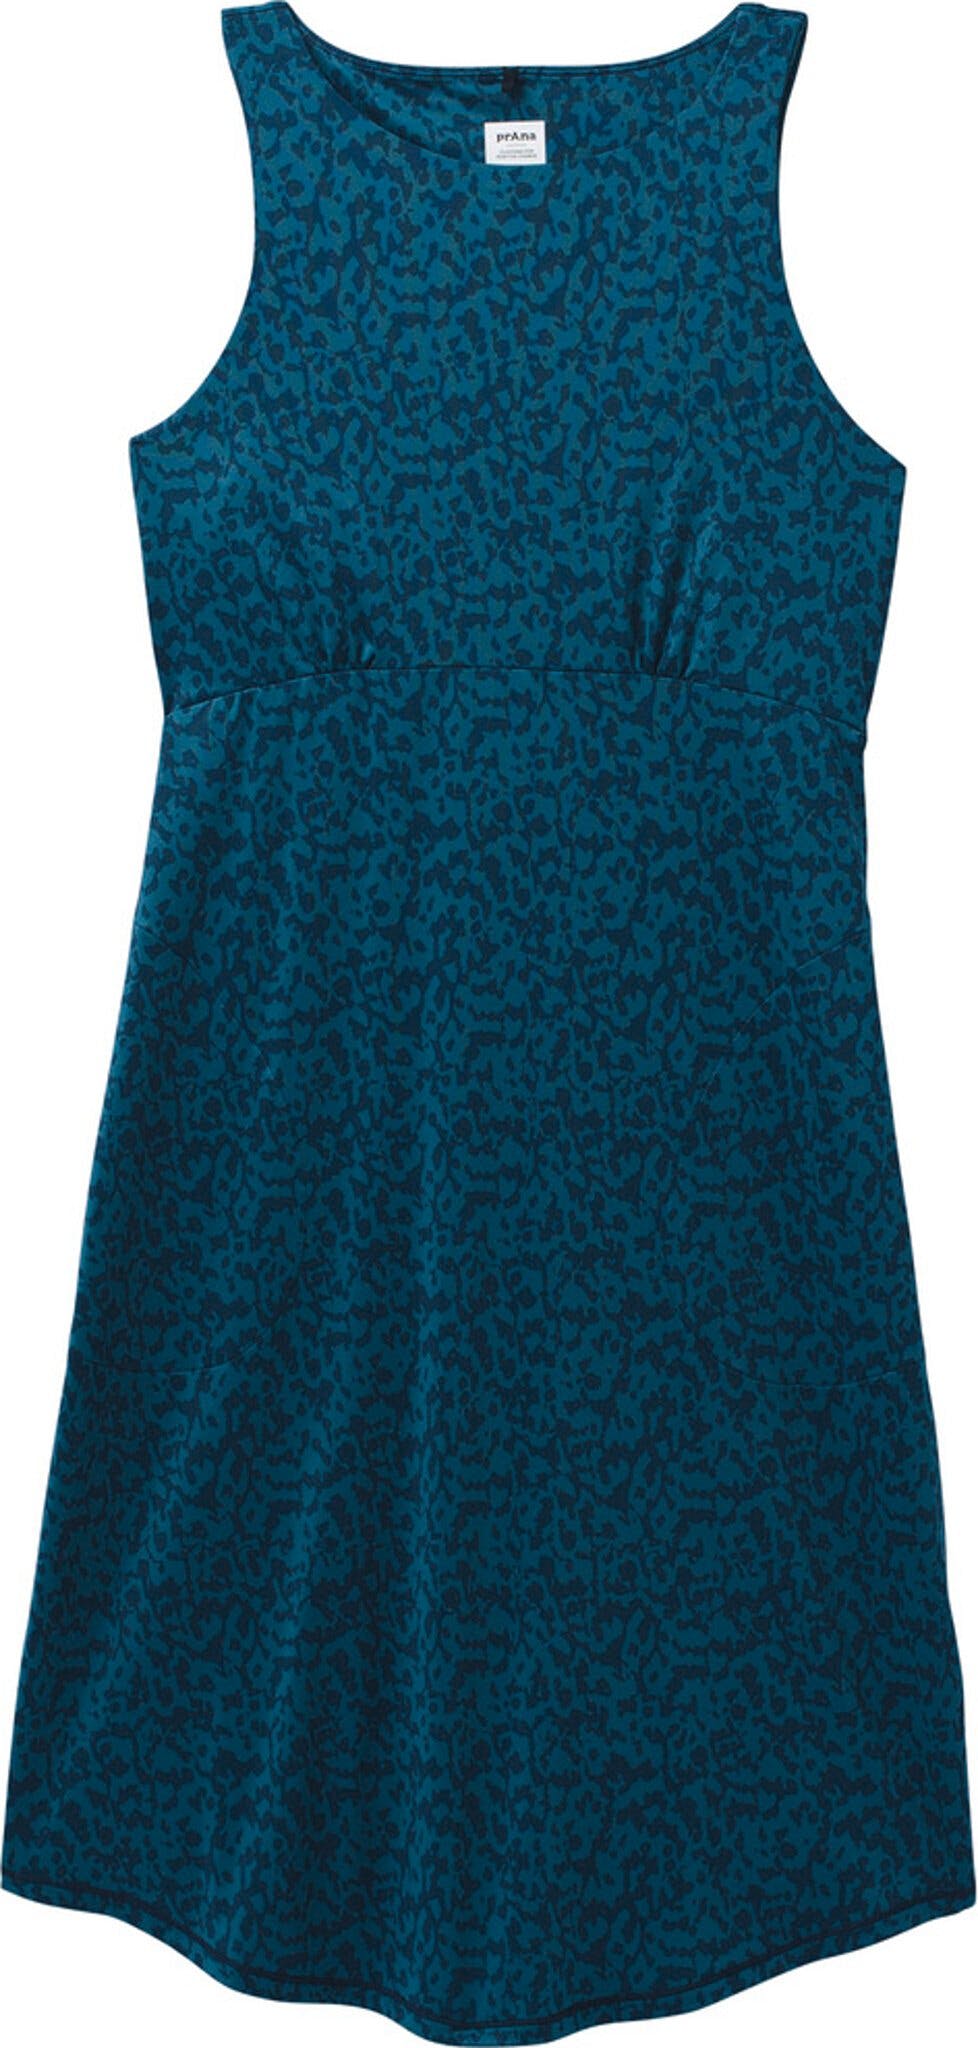 Product image for Emerald Lake Dress - Women's